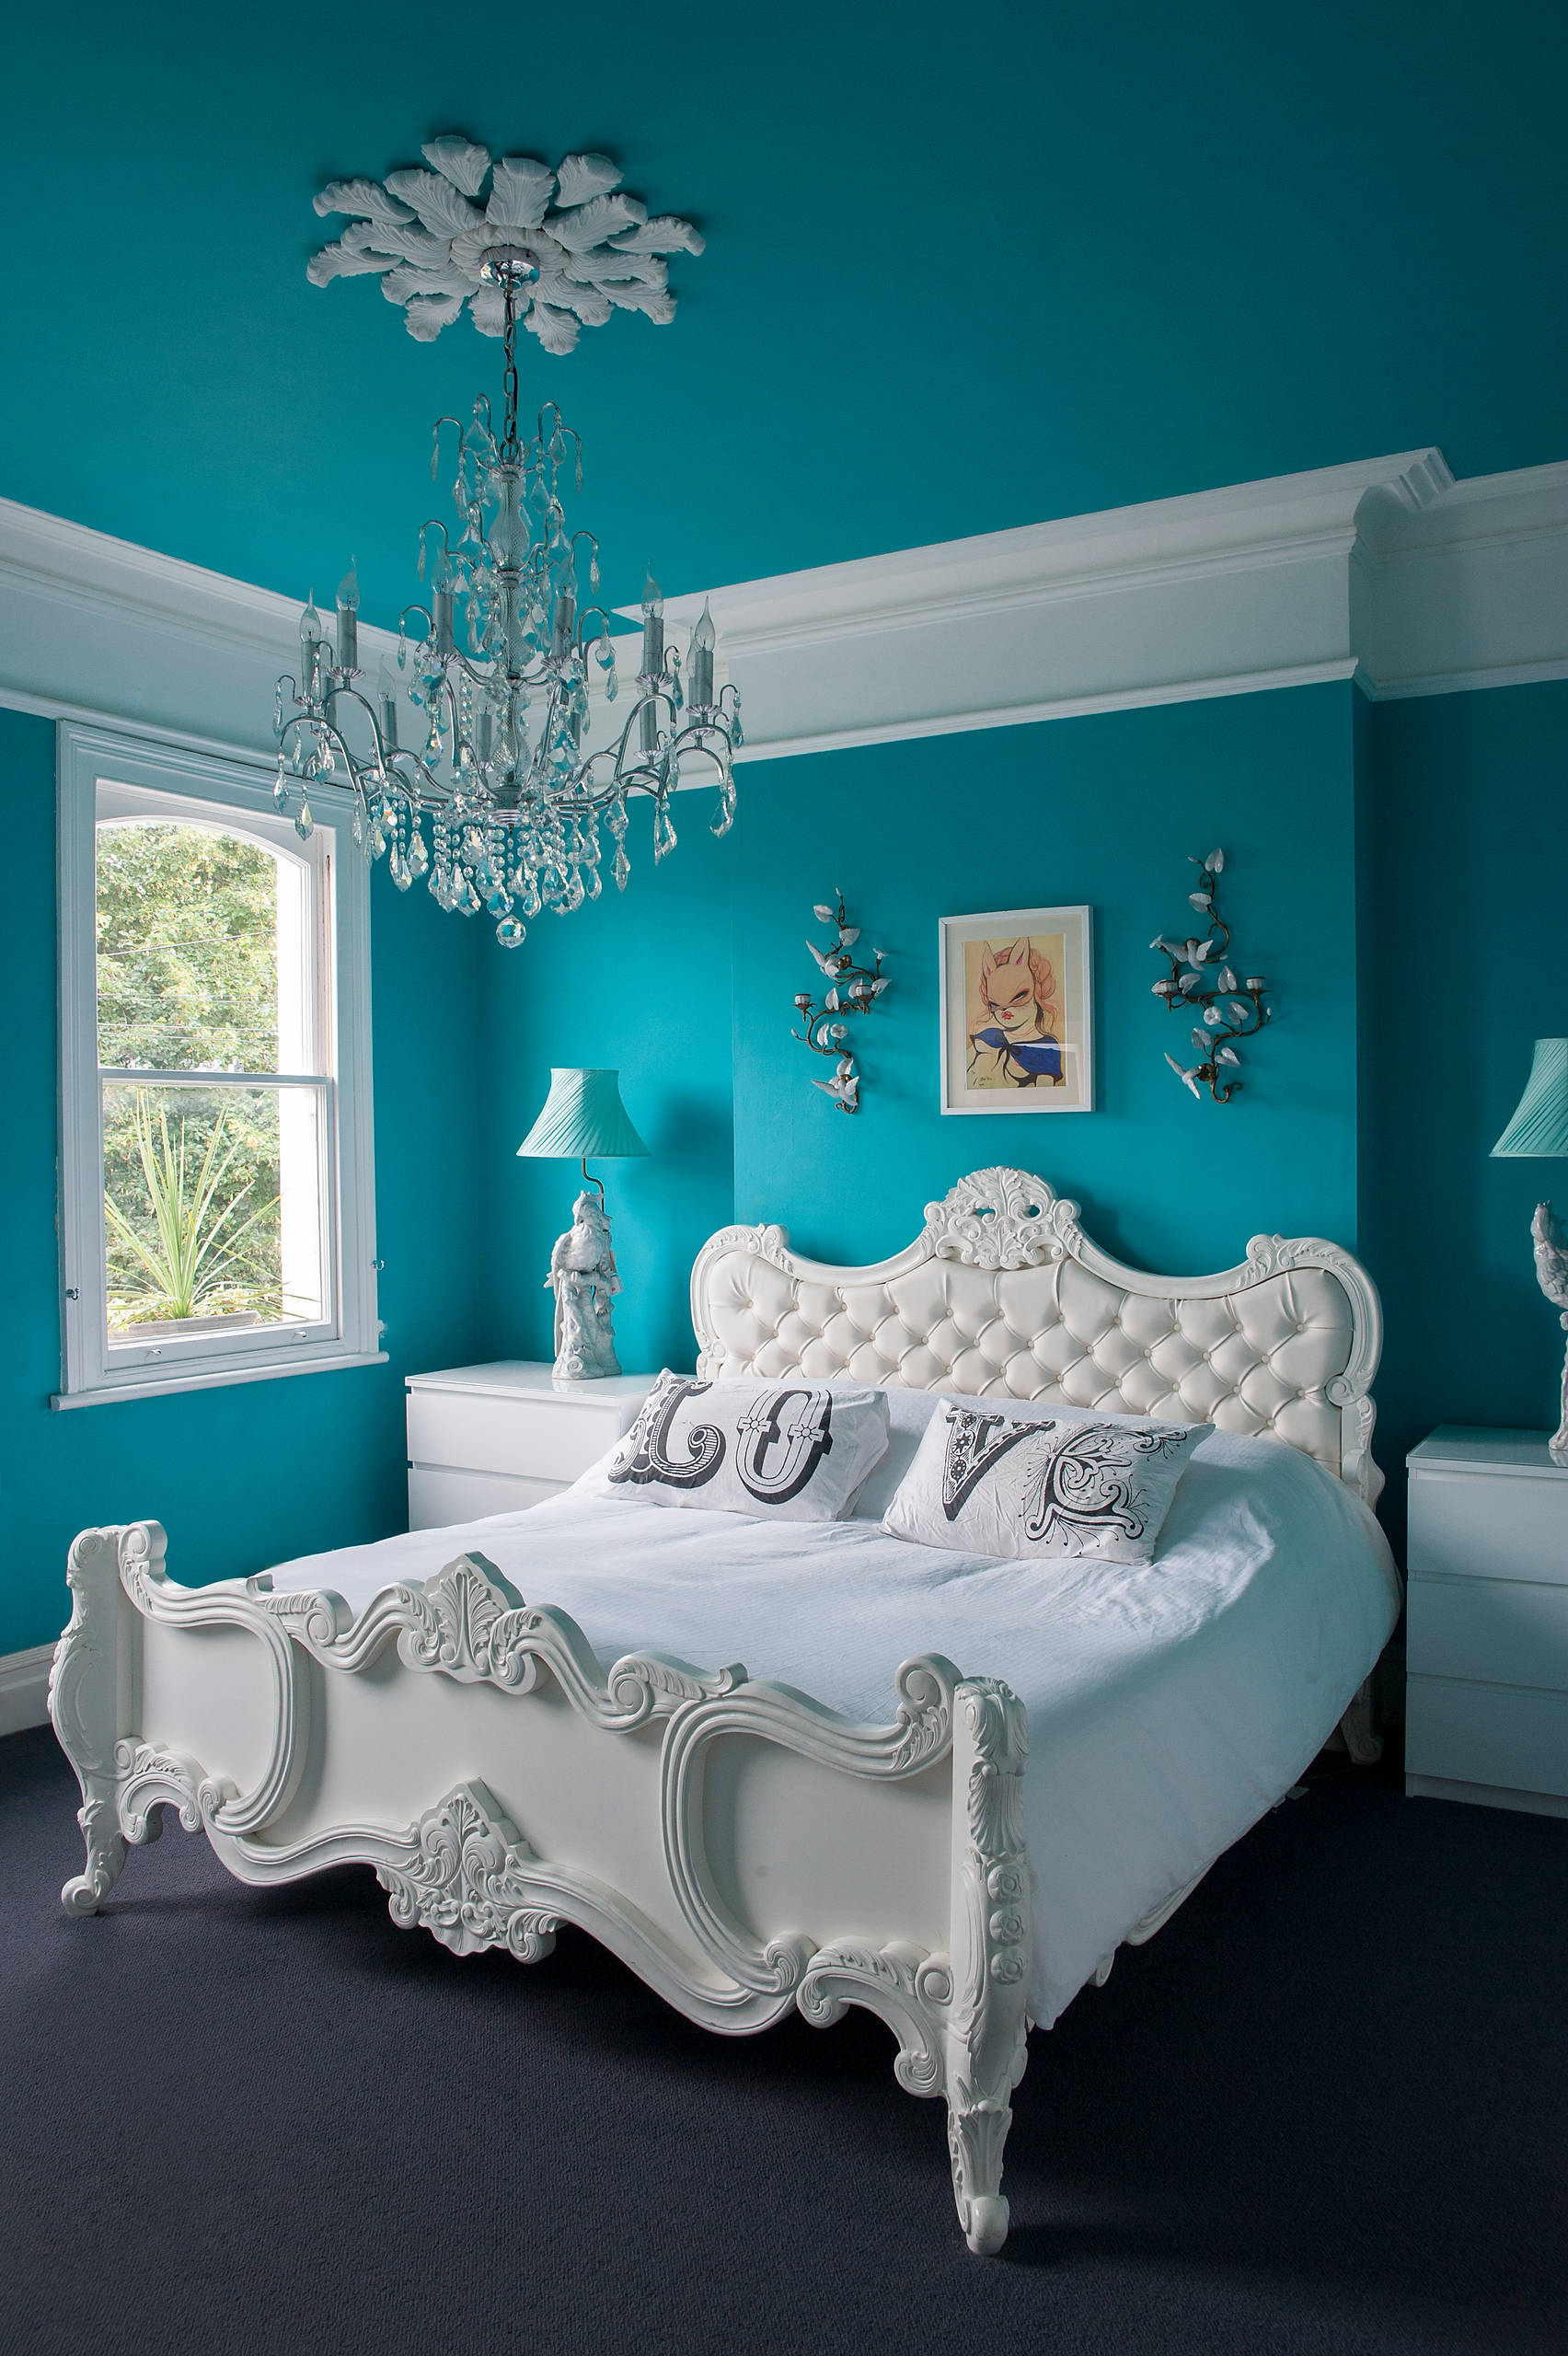 75 Beautiful Turquoise Bedroom Pictures Ideas April 2021 Houzz